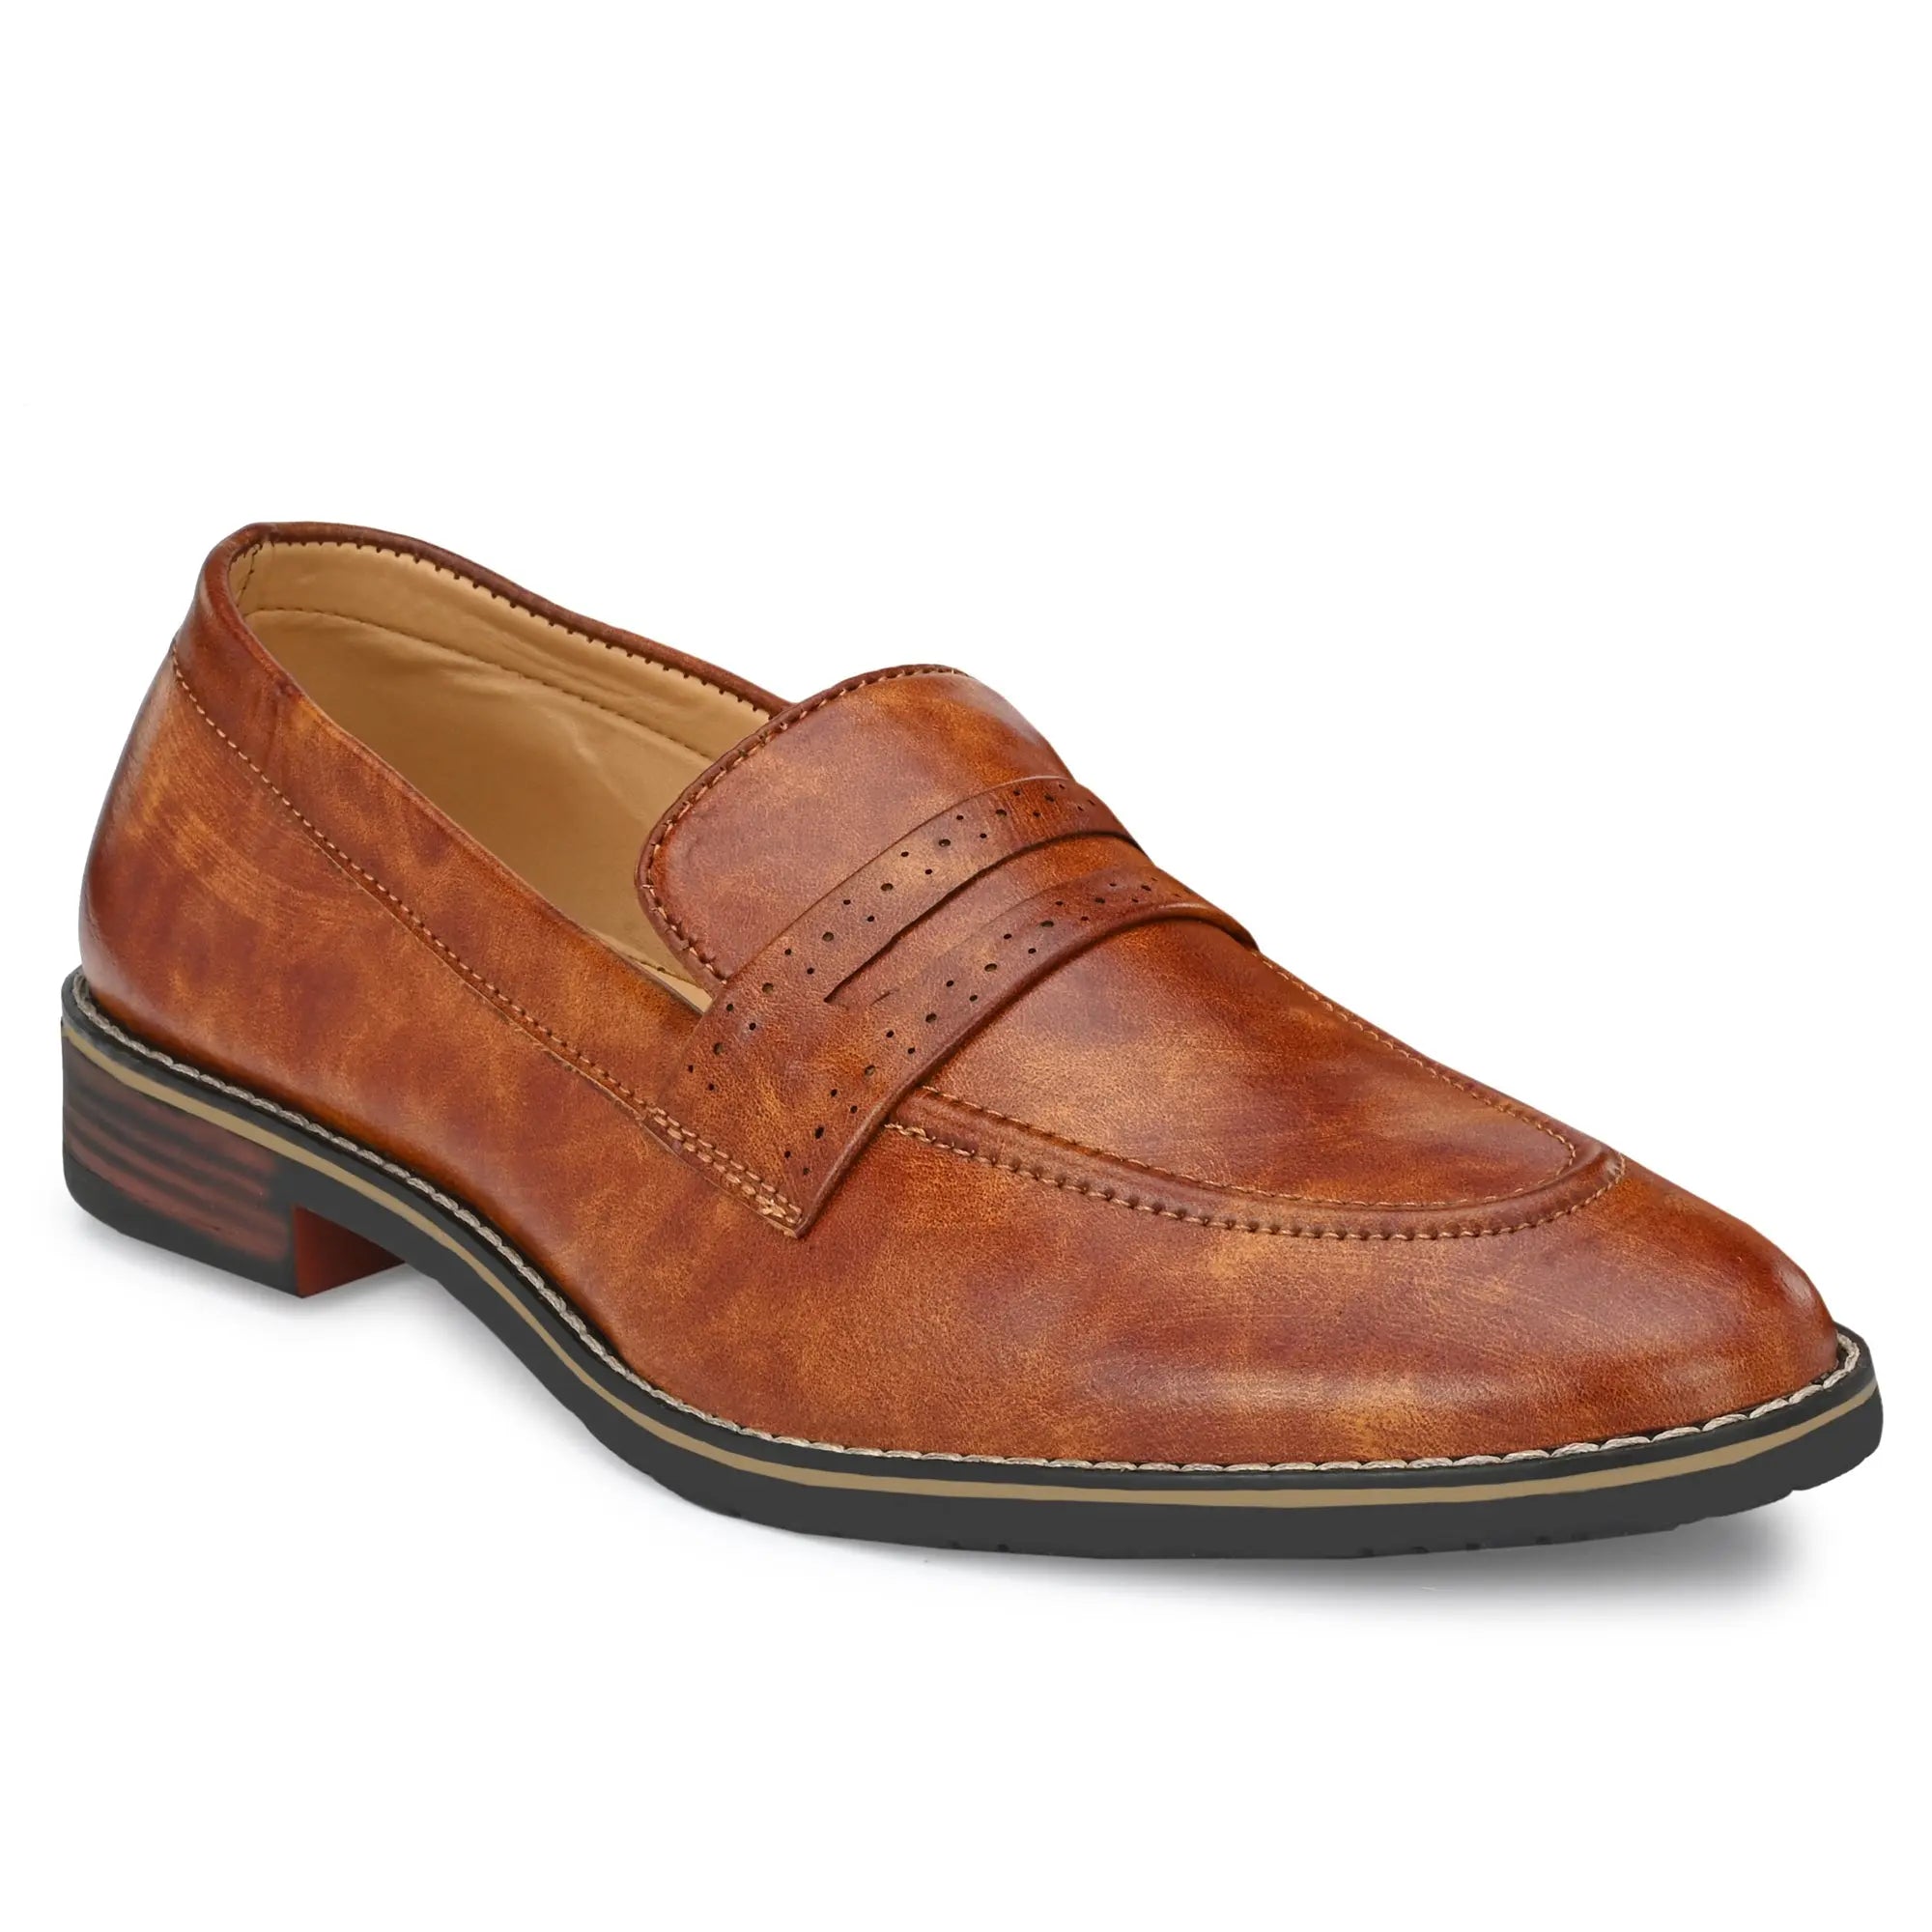 Attitudist Handcrafted Tan Plain Penny Slip On Round Toe Basket Loafer With Double Stitched Welts For Men MTOBSF